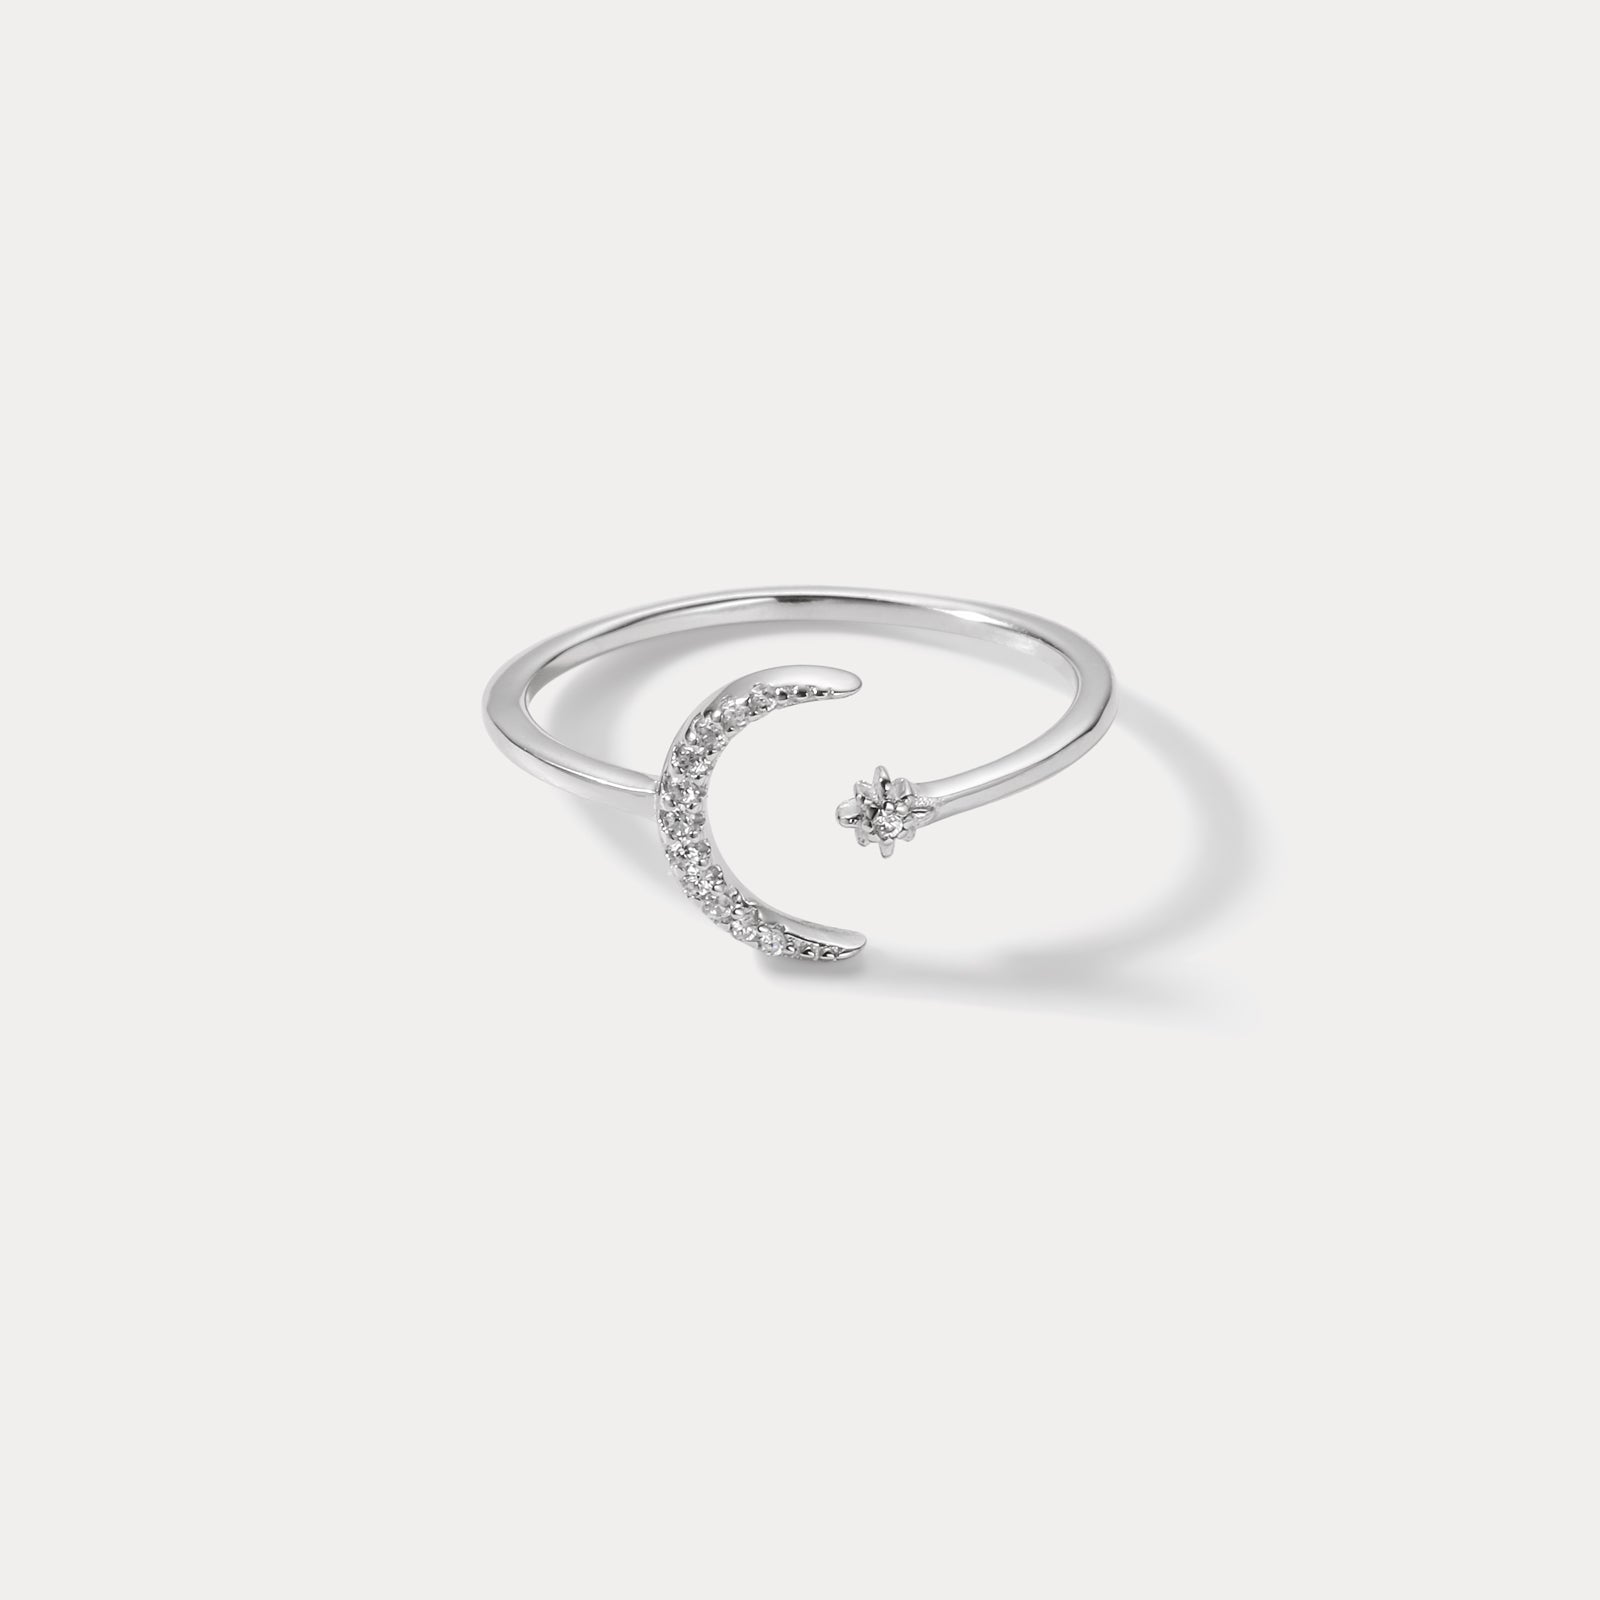 Silver Moon Ring Unique Gifts for Women